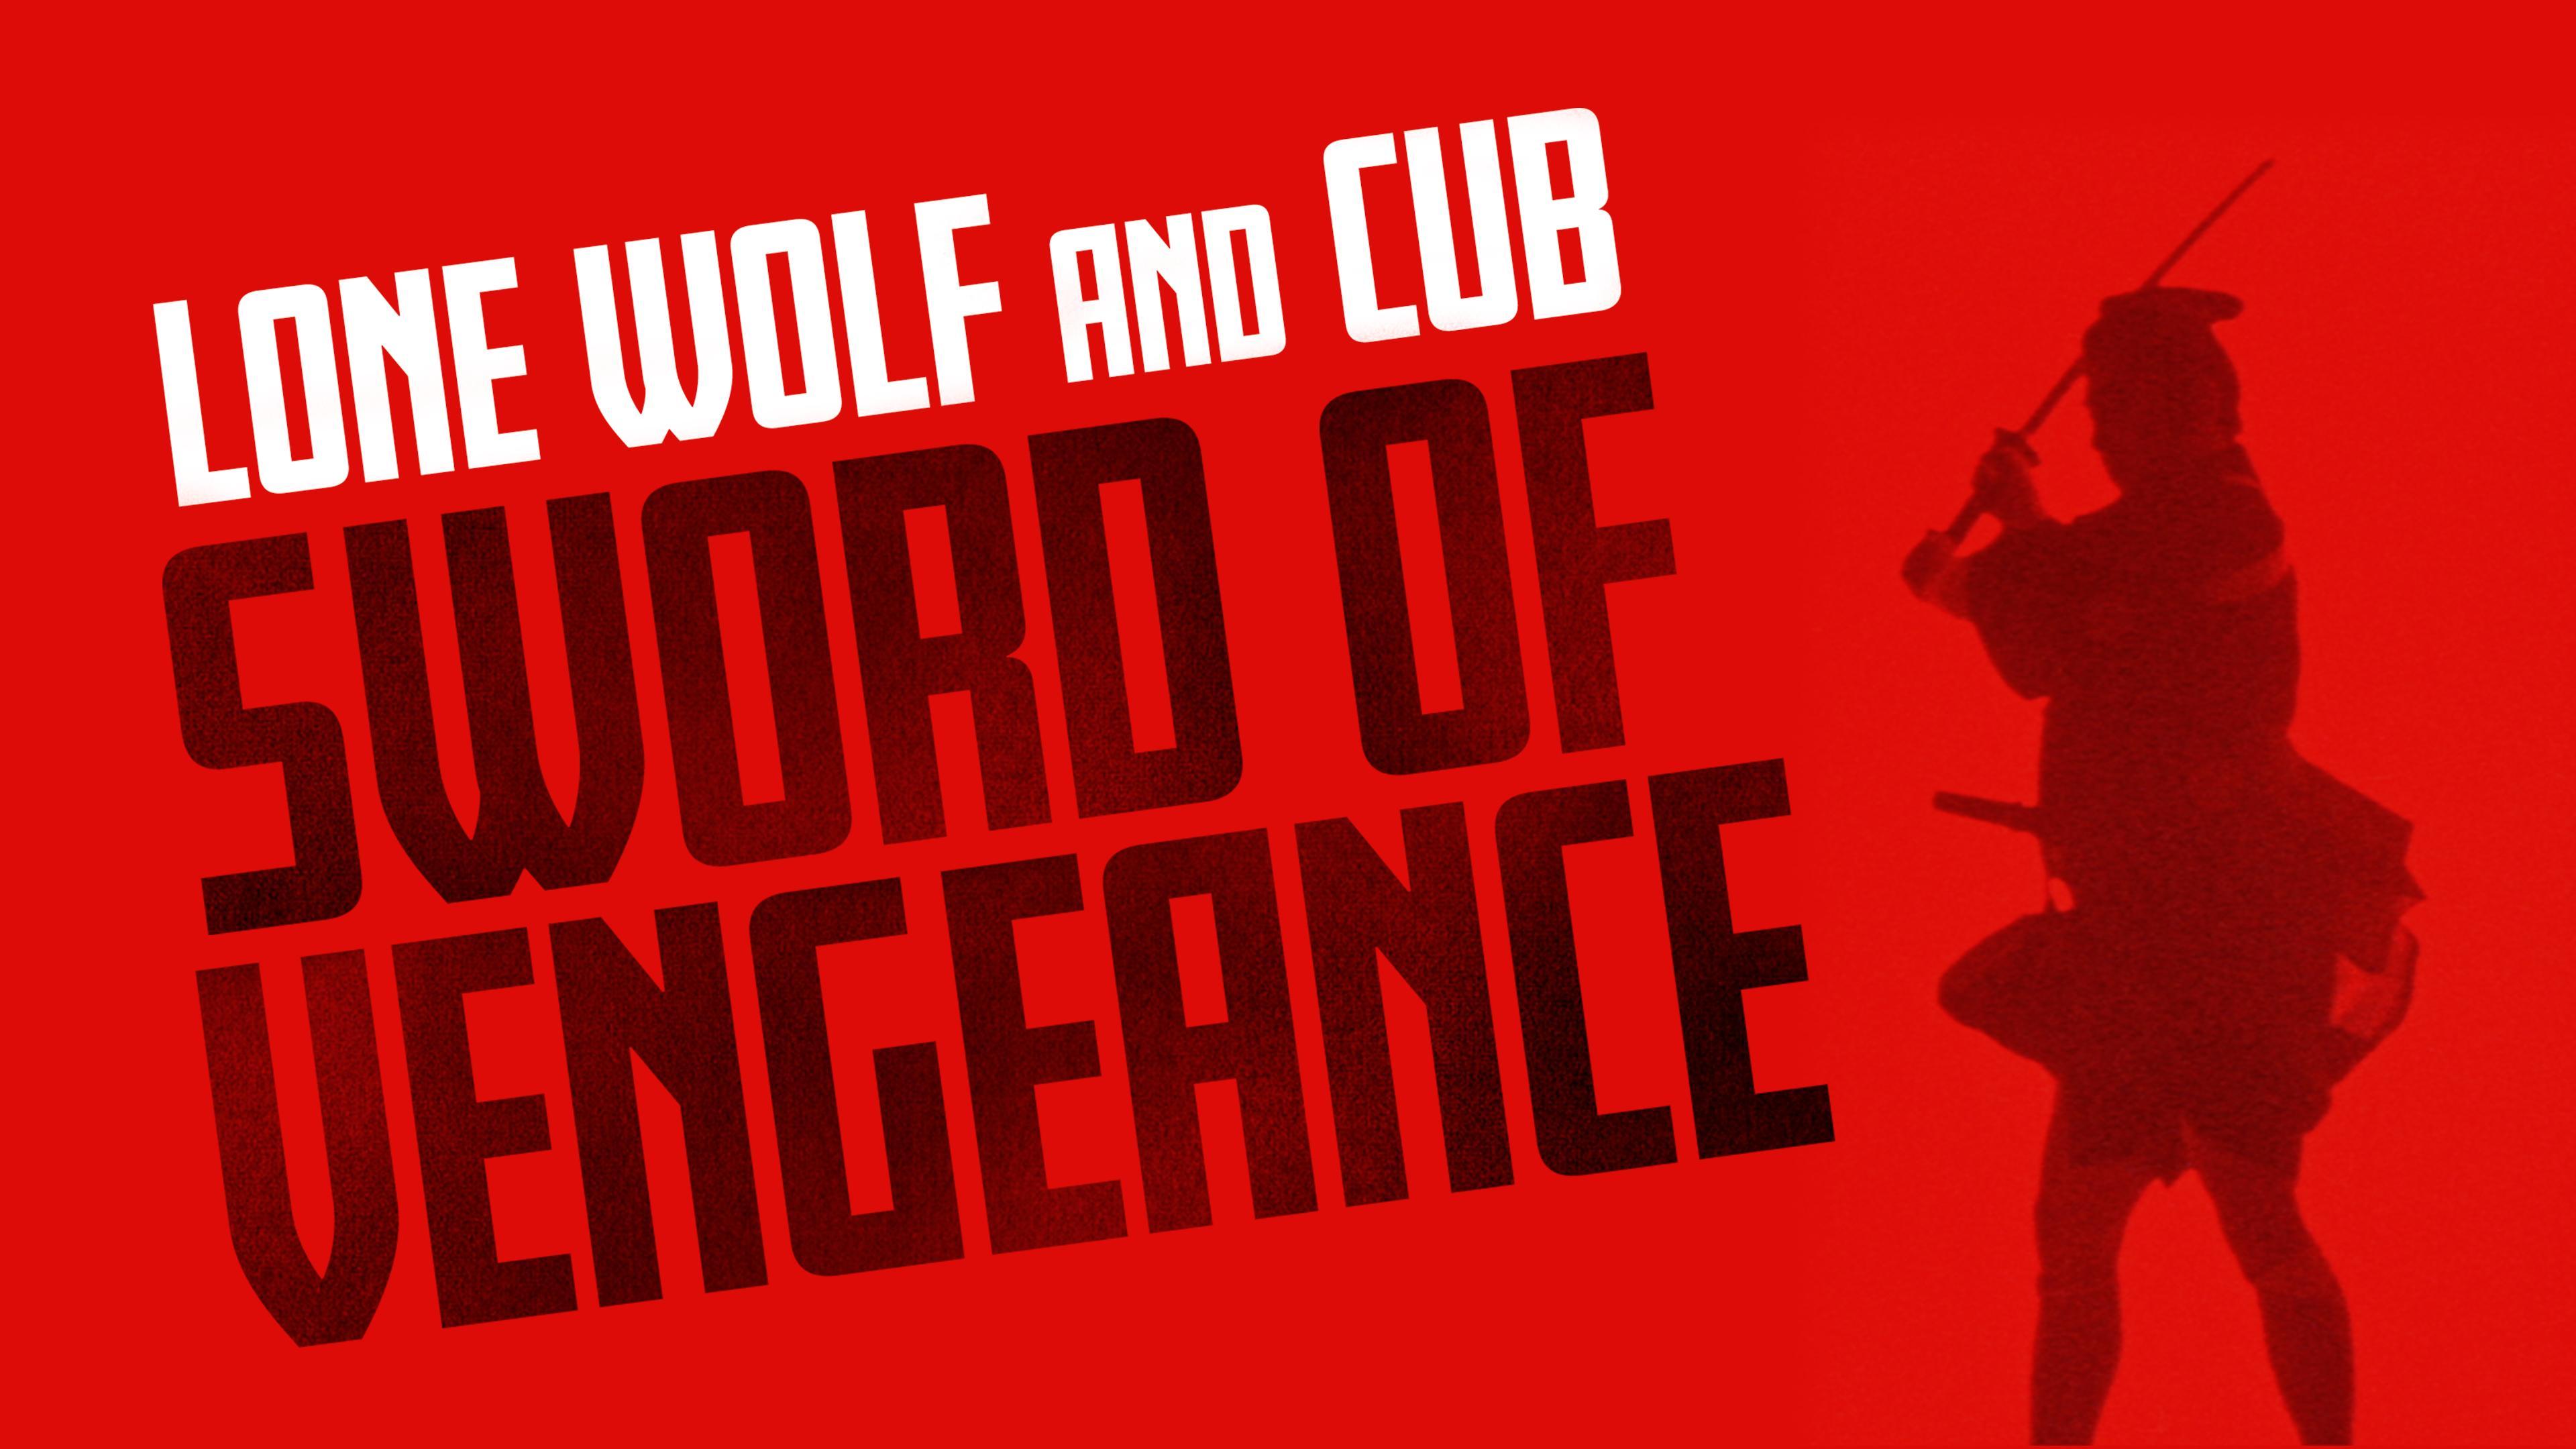 41 Facts about the movie Lone Wolf and Cub: Sword of Vengeance - Facts.net